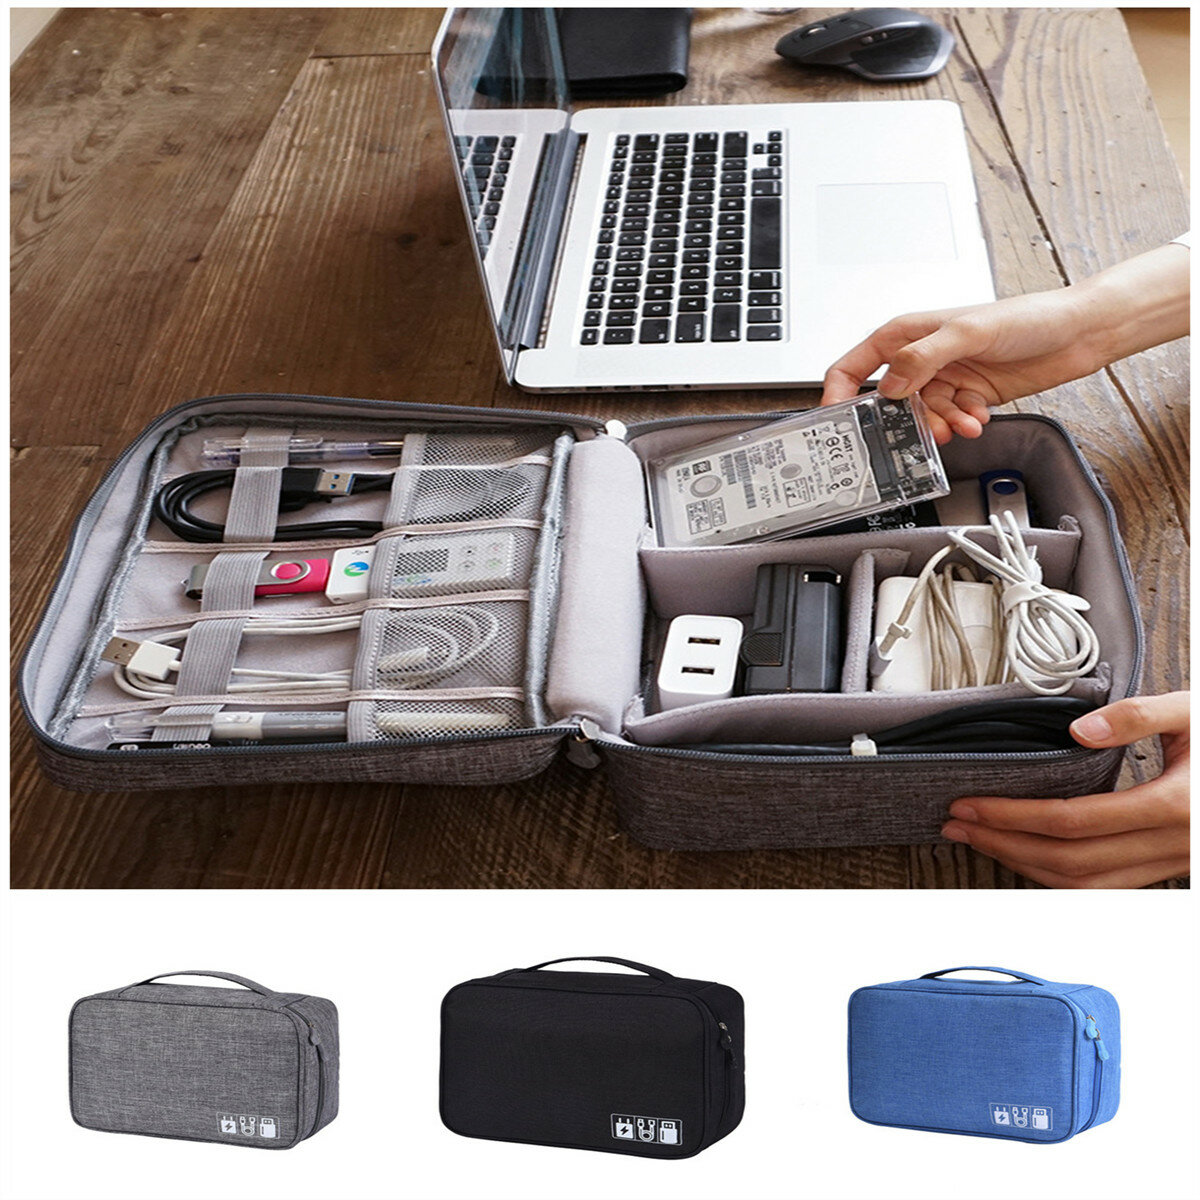 Portable Travel Waterproof Outdoor USB Cable Storage Bag Phone Charger Organizer 